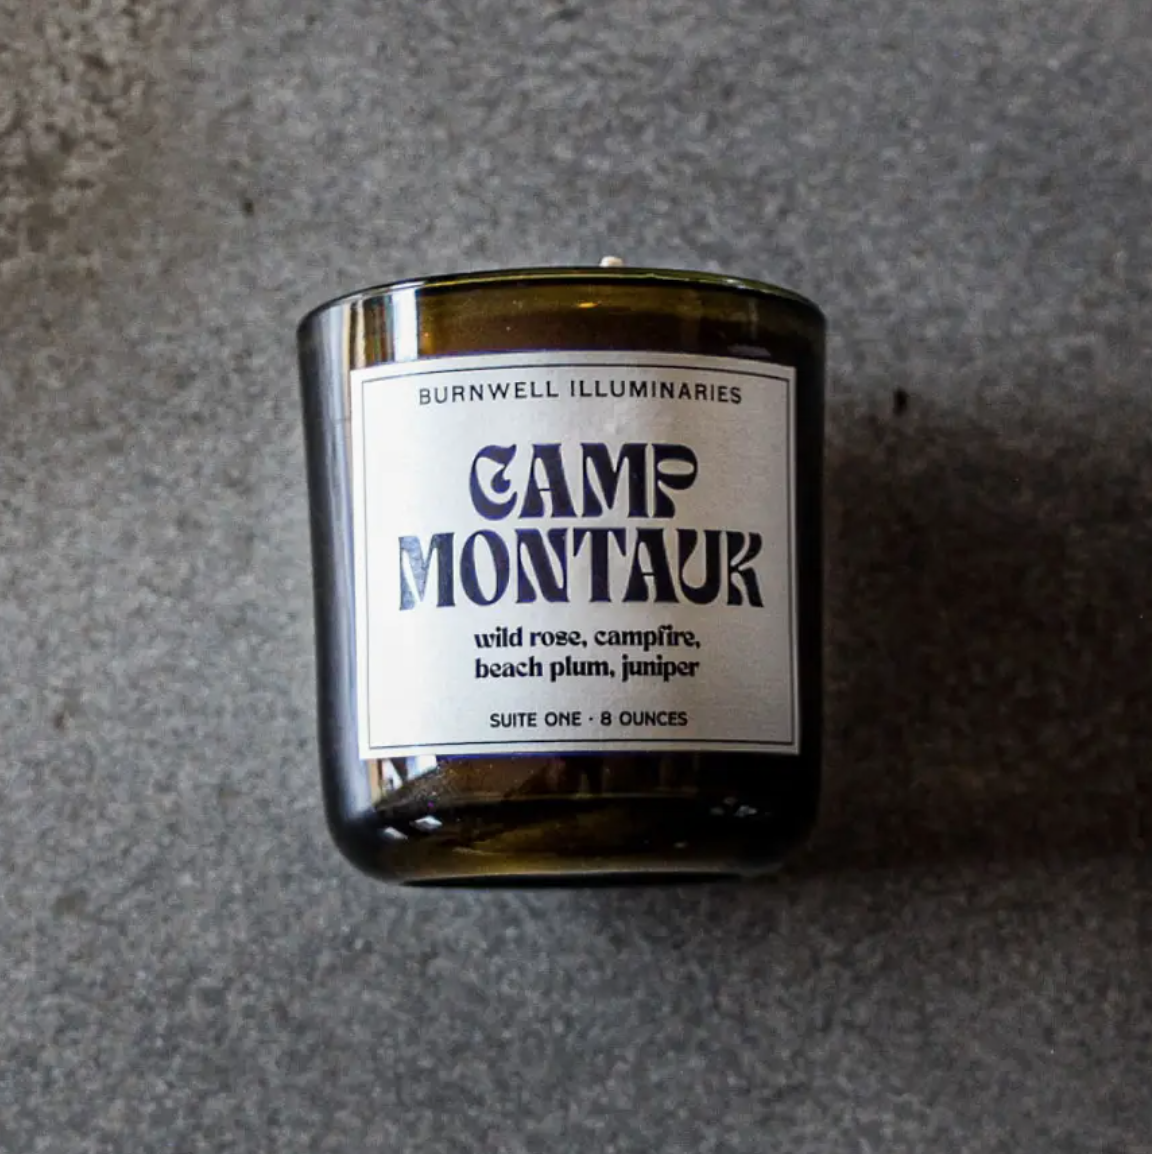 A Barnaby Black Candle in a dark glass jar labeled &quot;Camp Montauk&quot; with scent notes of wild rose, campfire, beach plum, and juniper listed, placed on a gray textured surface in Arizona style. (Brand: Faire)